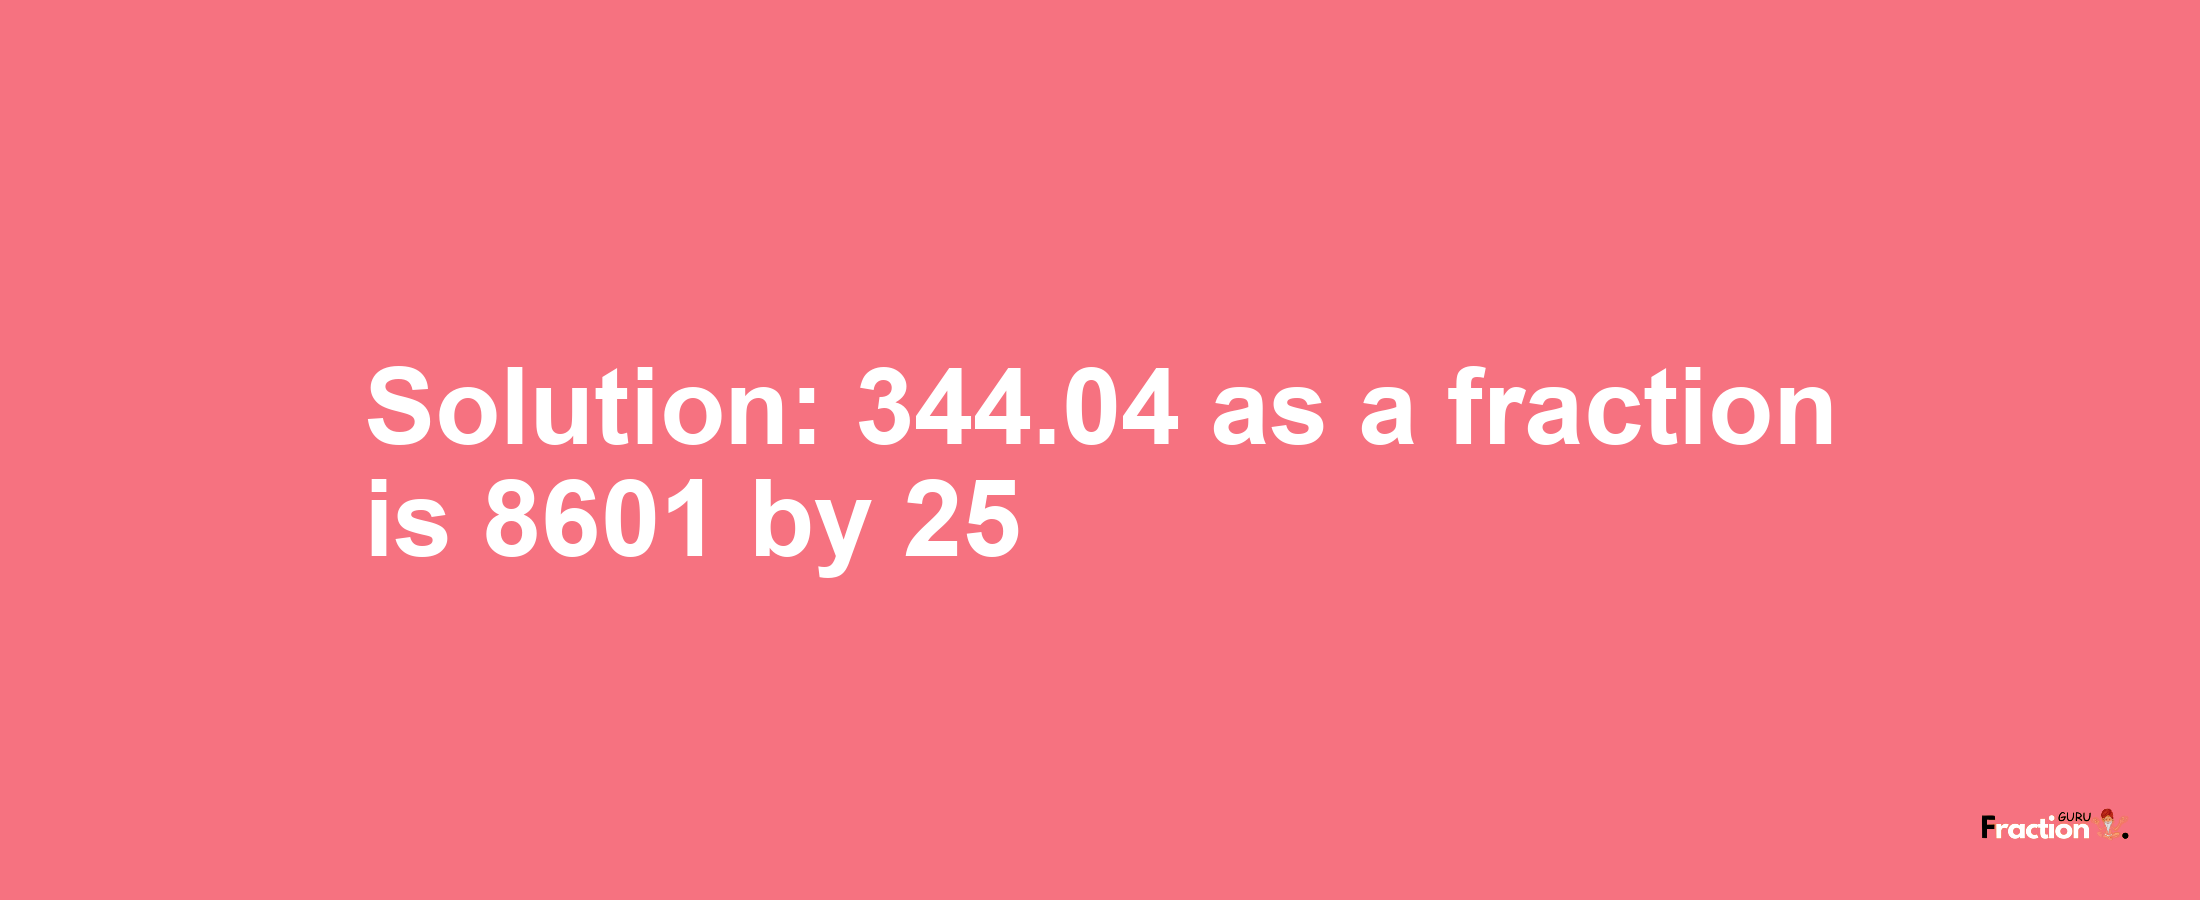 Solution:344.04 as a fraction is 8601/25